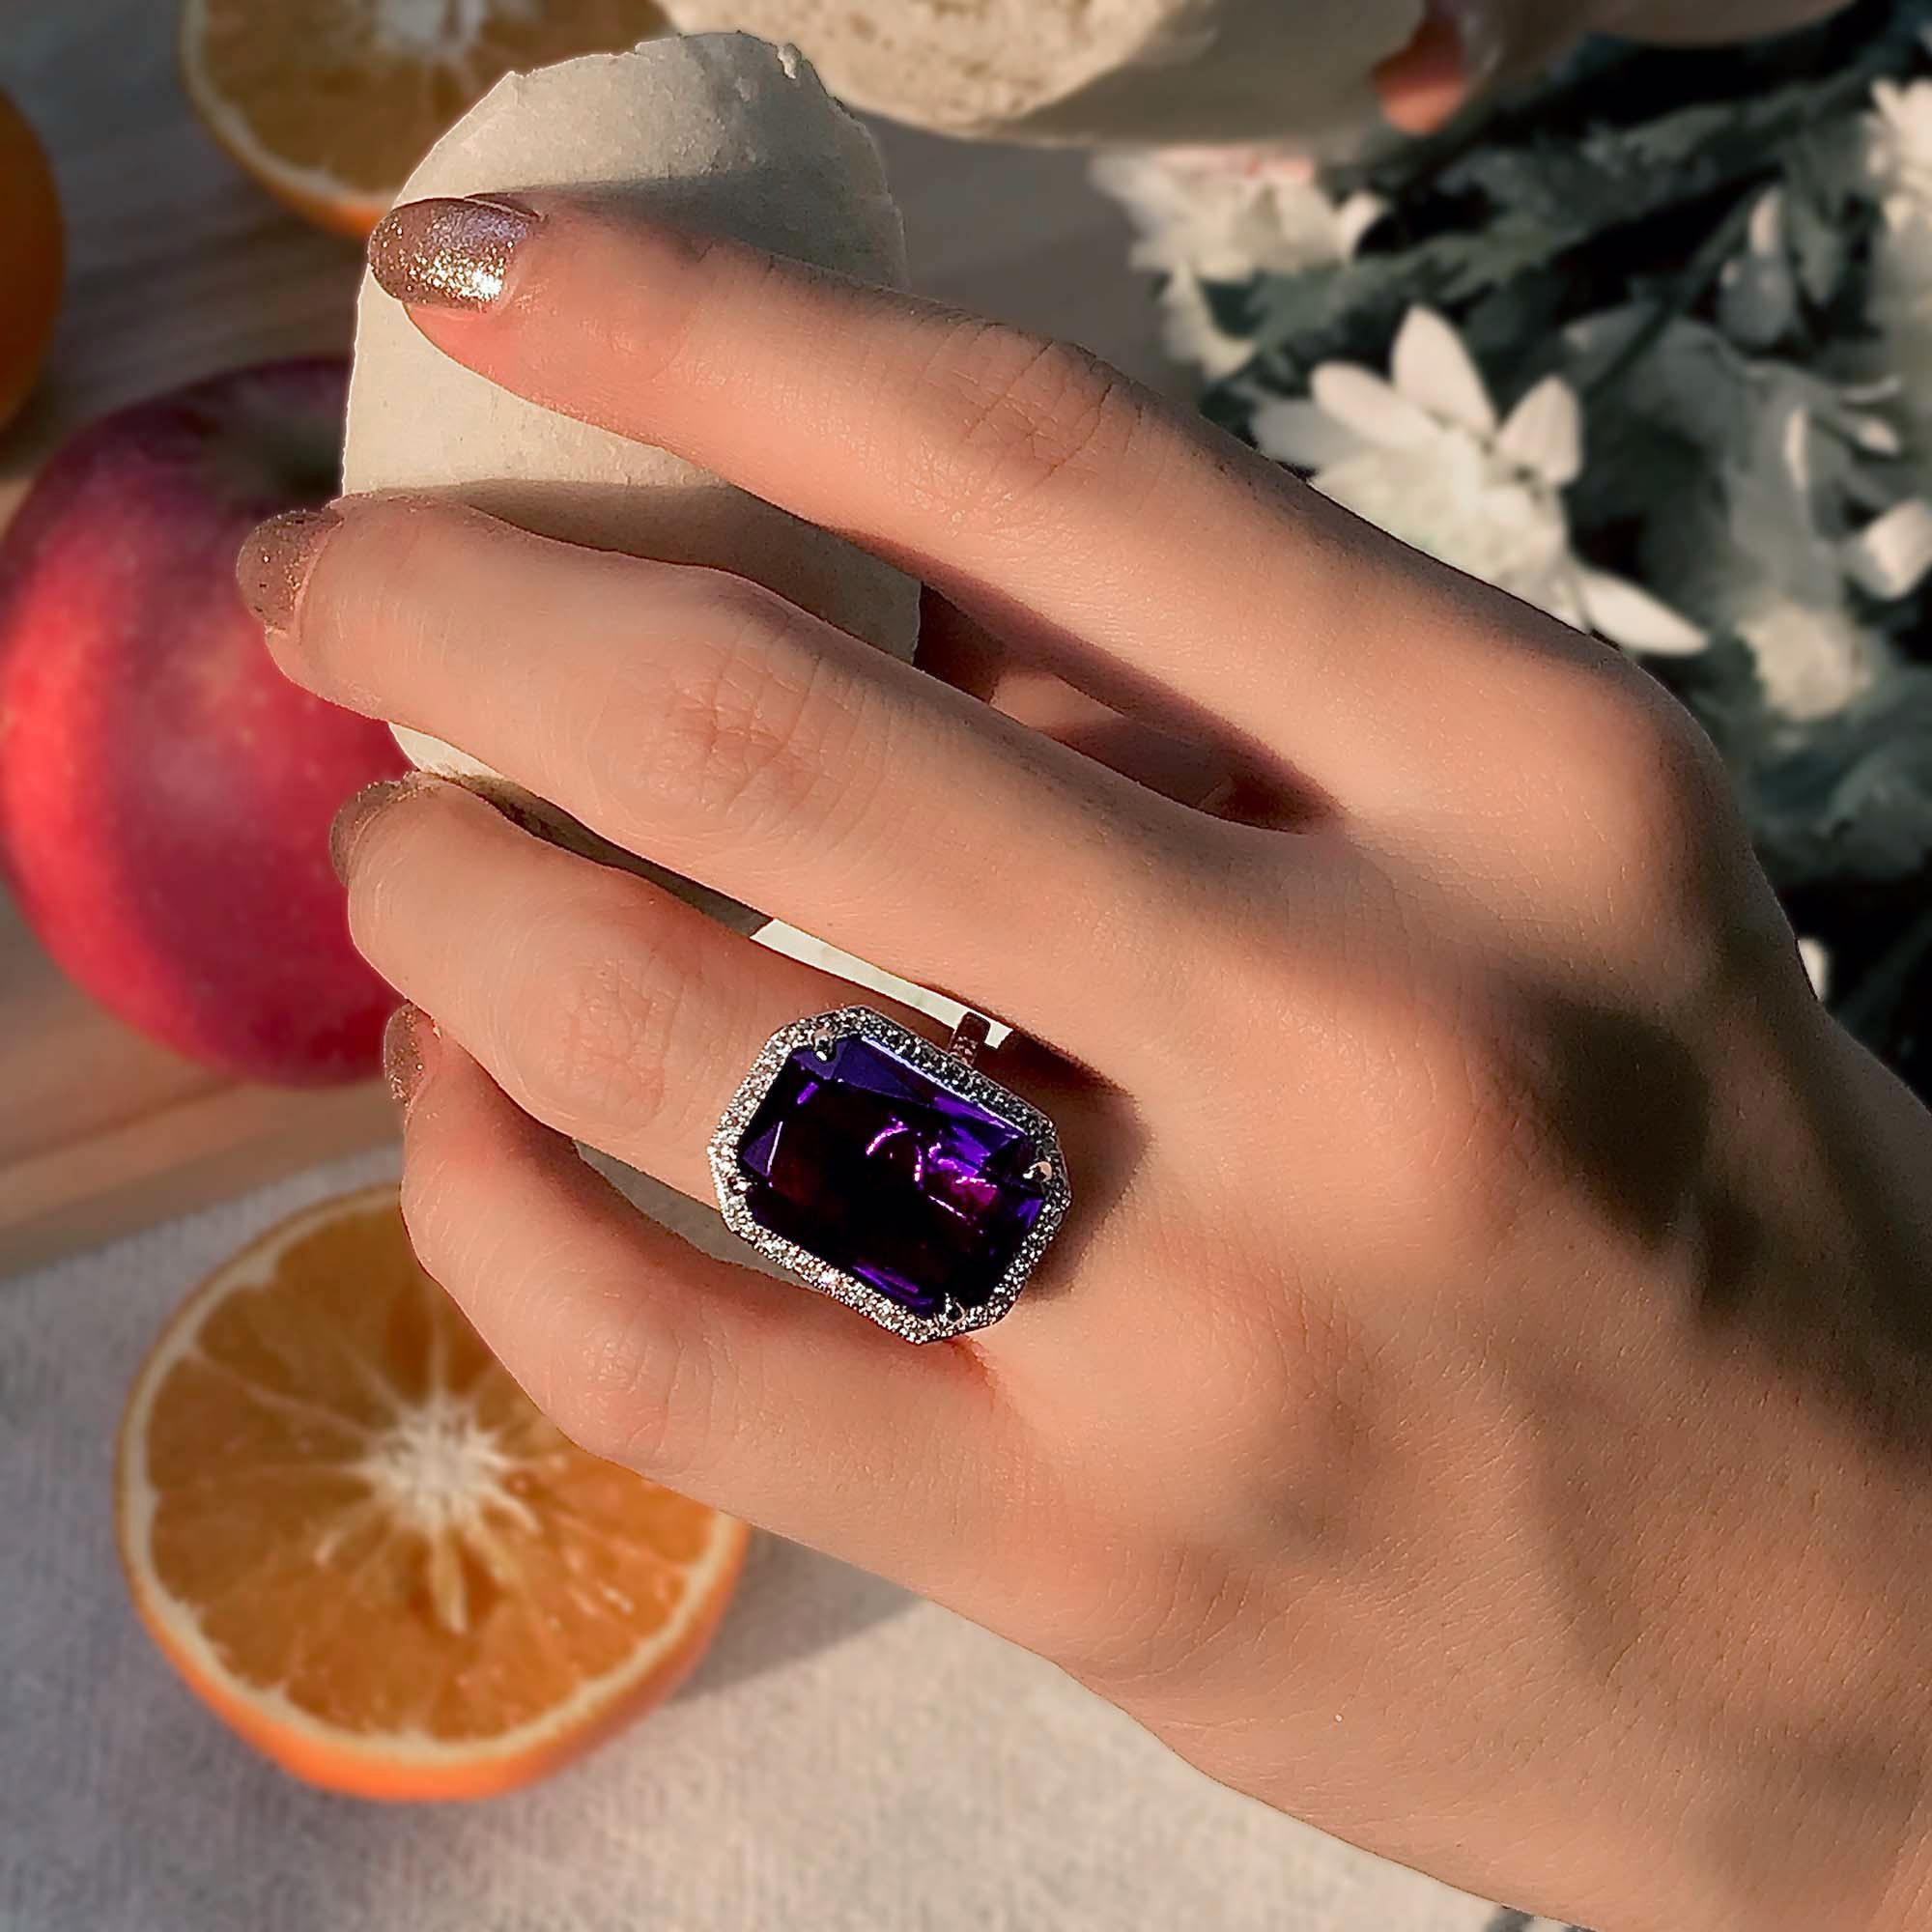 This beautiful Art Deco style amethyst ring is centered with an emerald cut amethyst and accented with sparkling diamond halo. The ring is craft of 18k white gold. Adorn yourself with this February birthstone jewelry.

Ring Information
Style: Art